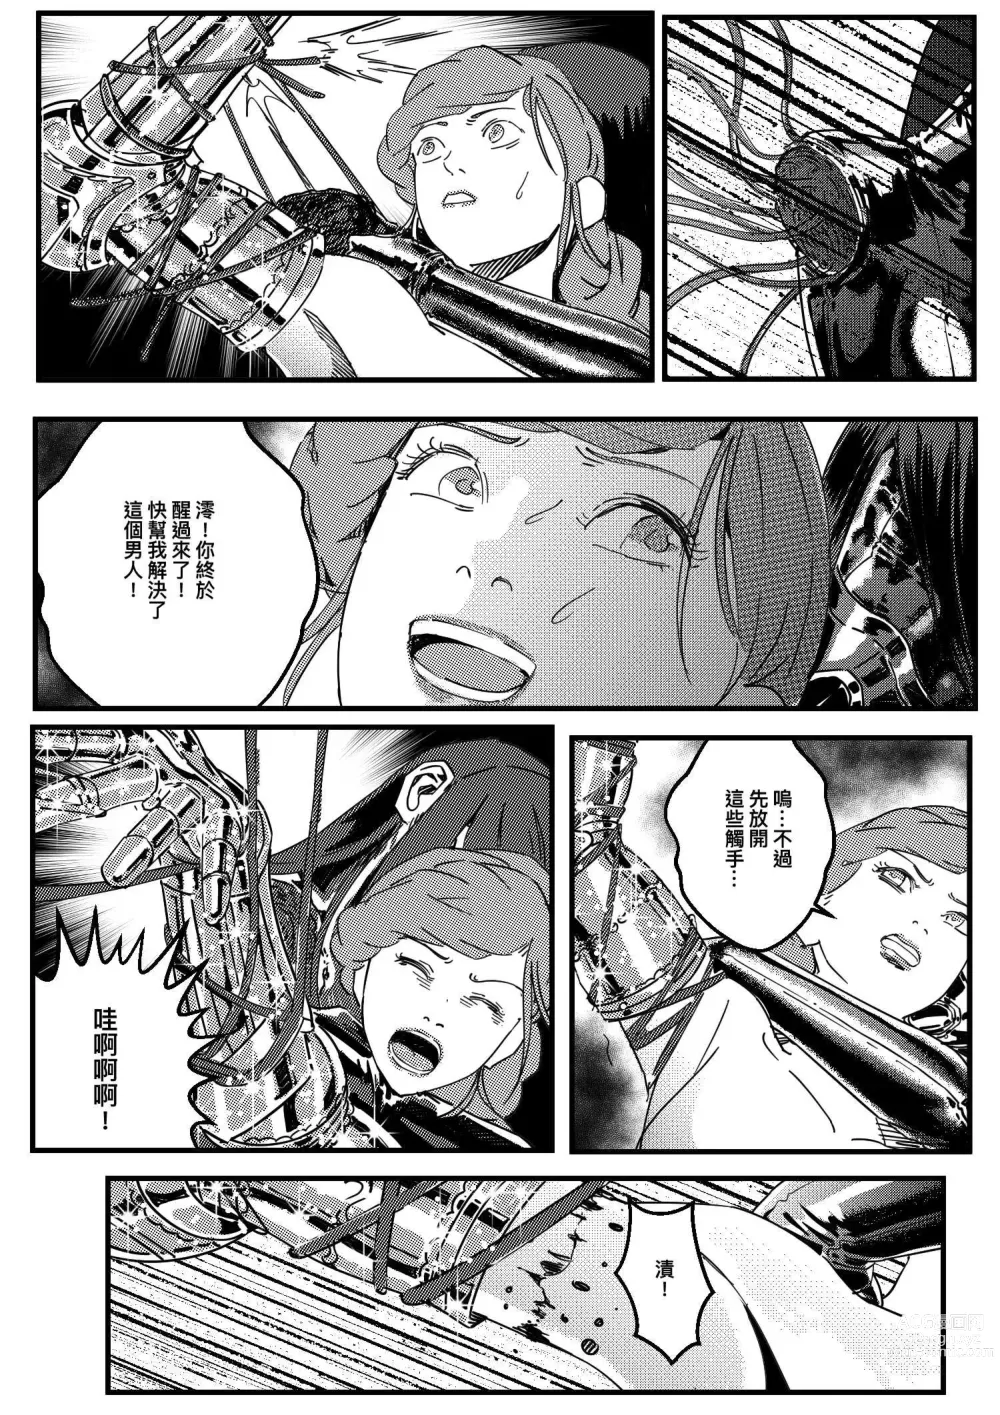 Page 527 of doujinshi 鉄處女/Ironmaiden 01-03（已腰斬）